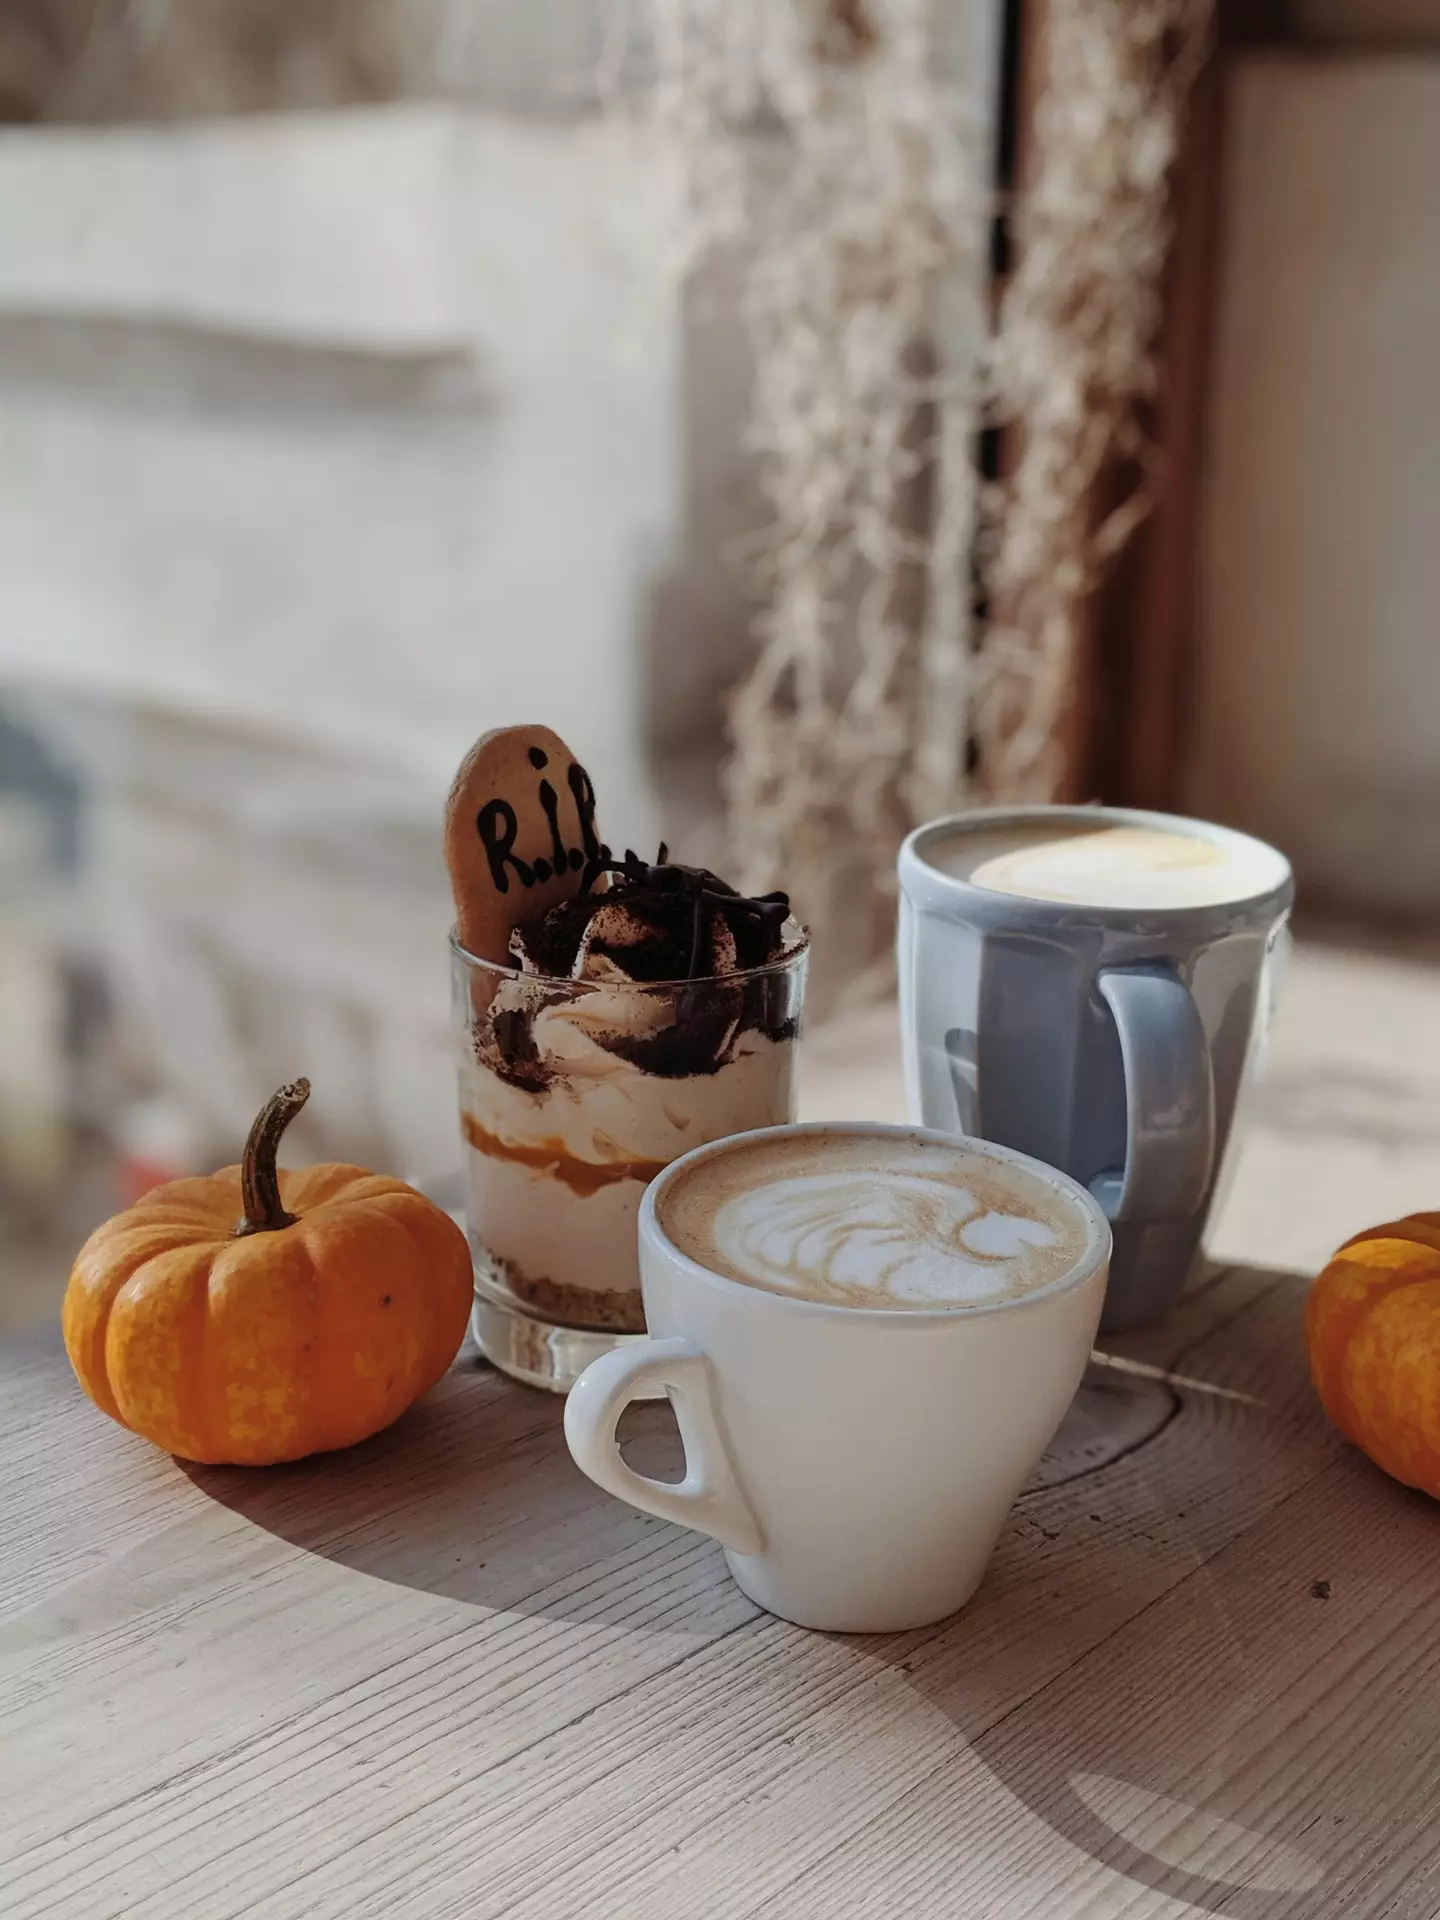 We'll be enjoying our pumpkin spice for many years to come (